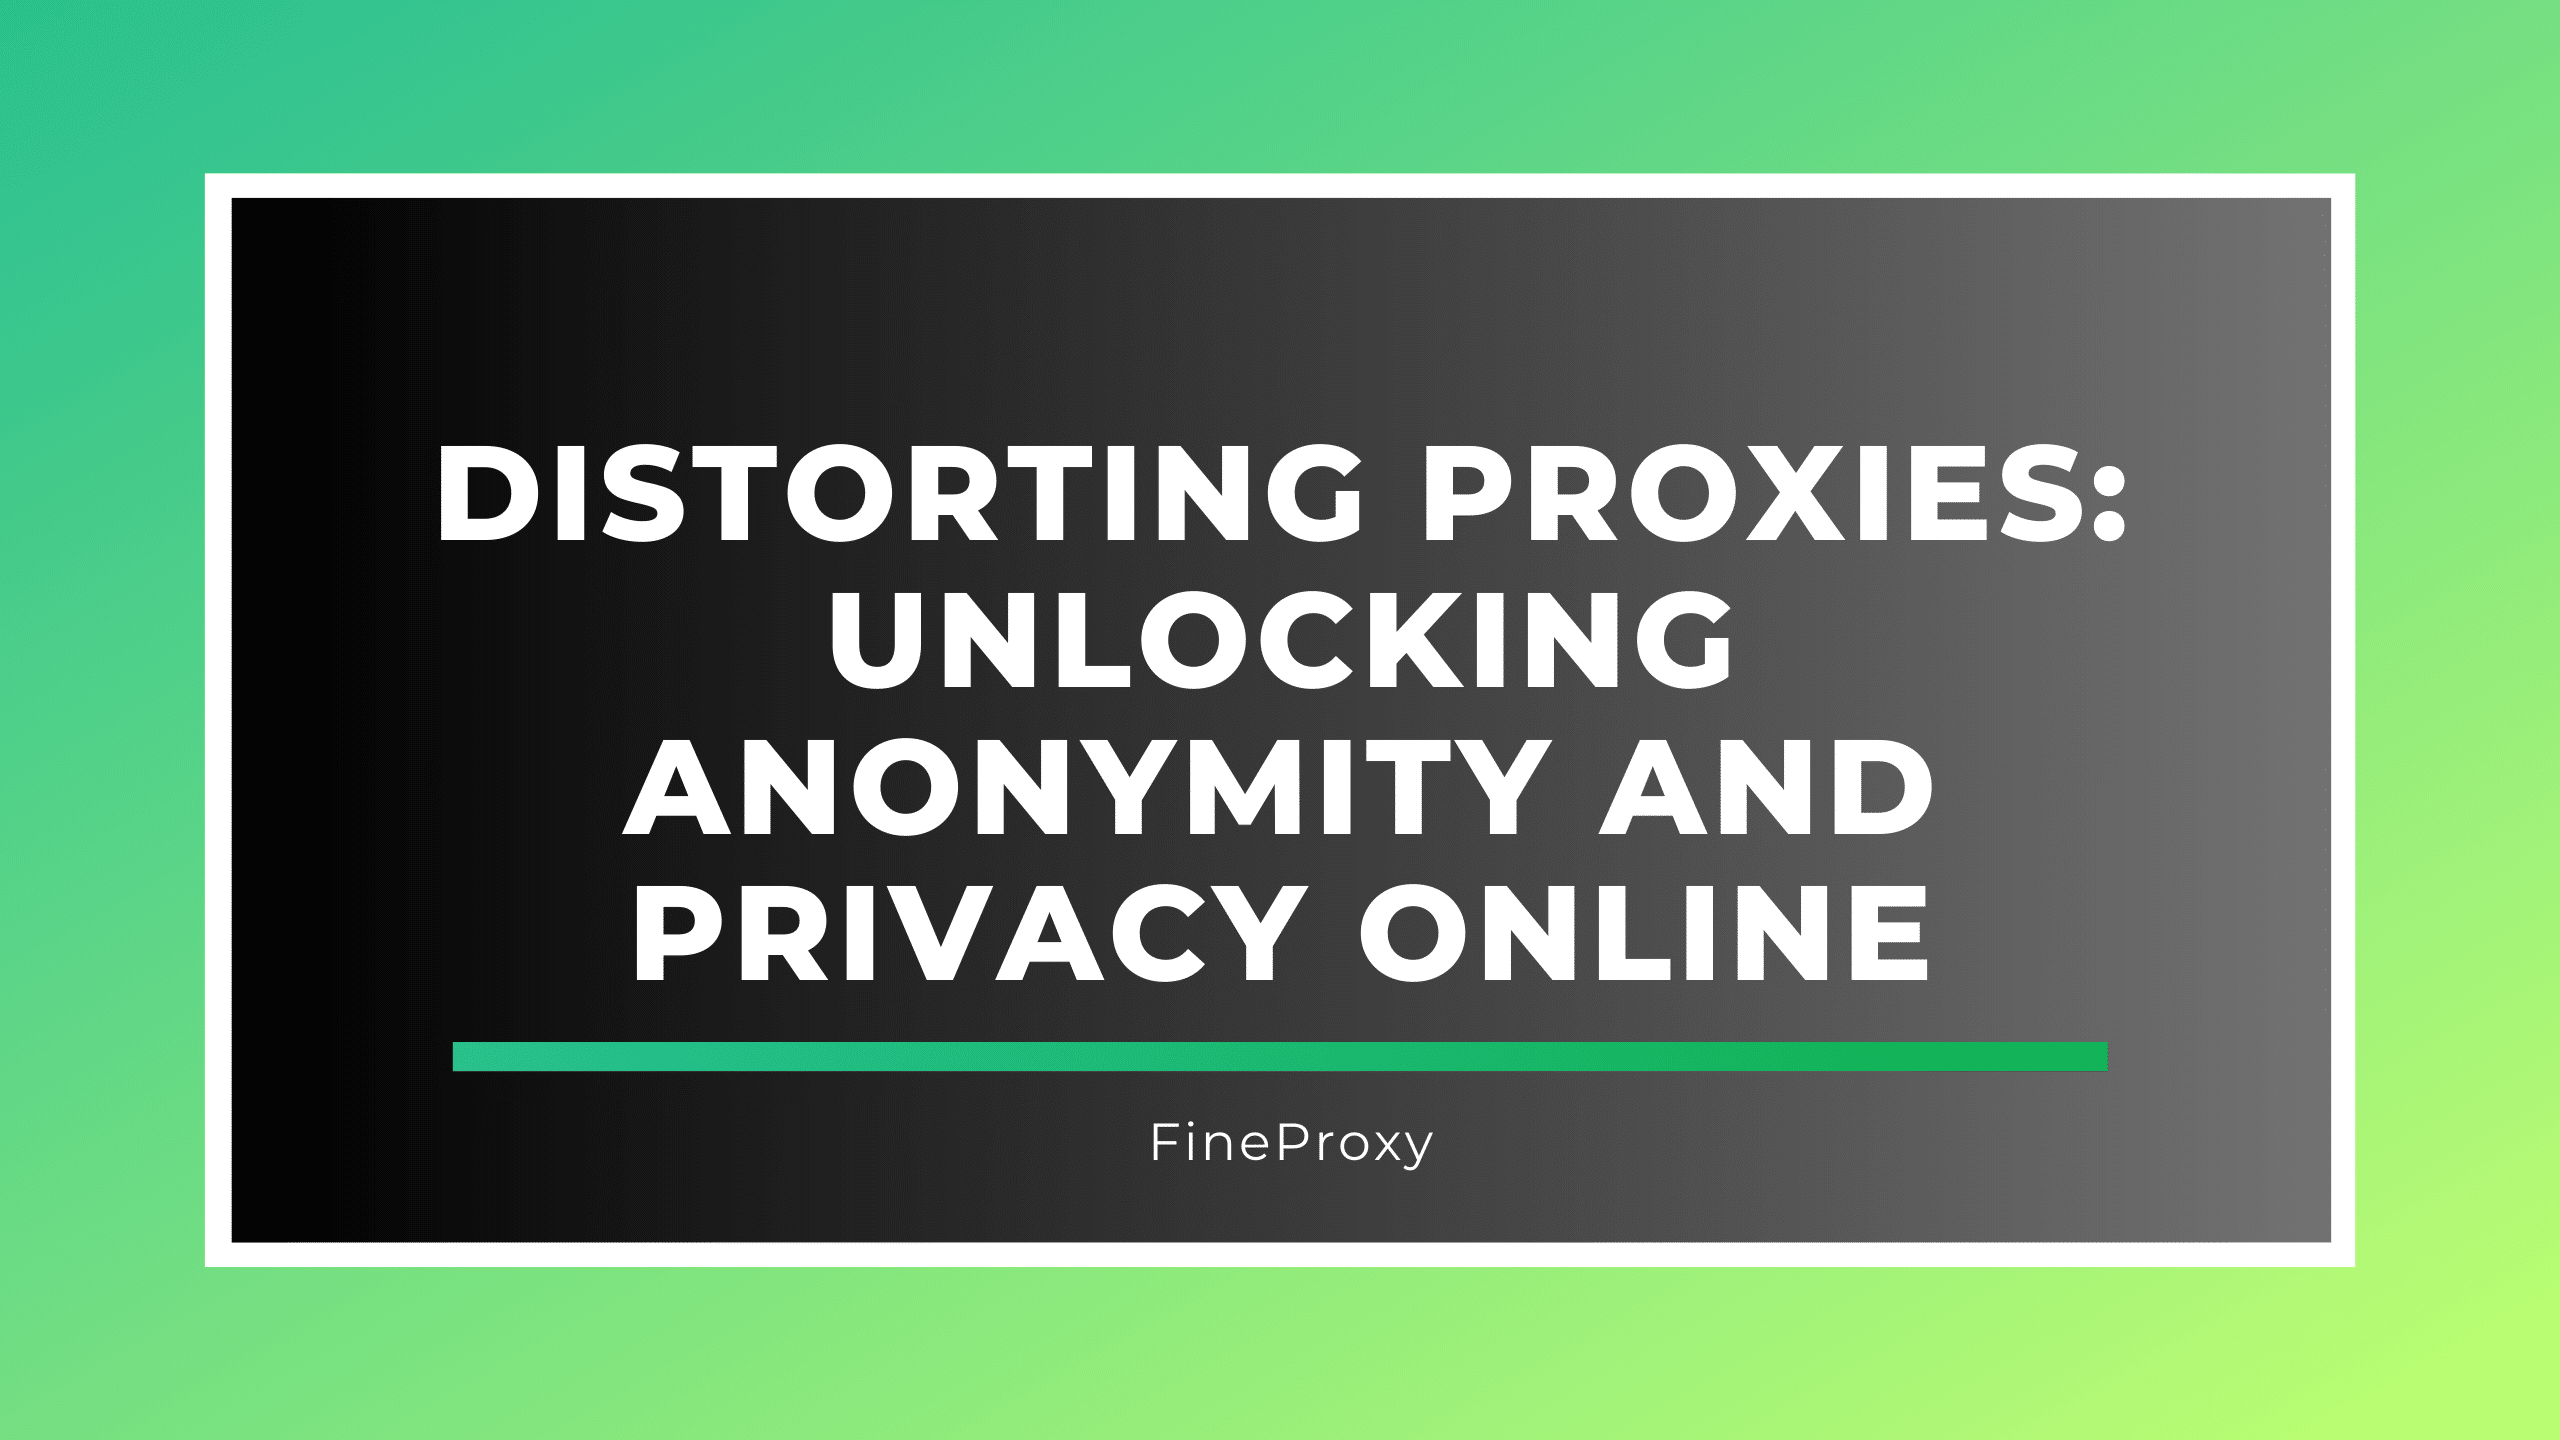 Distorting Proxies: Unlocking Anonymity and Privacy Online